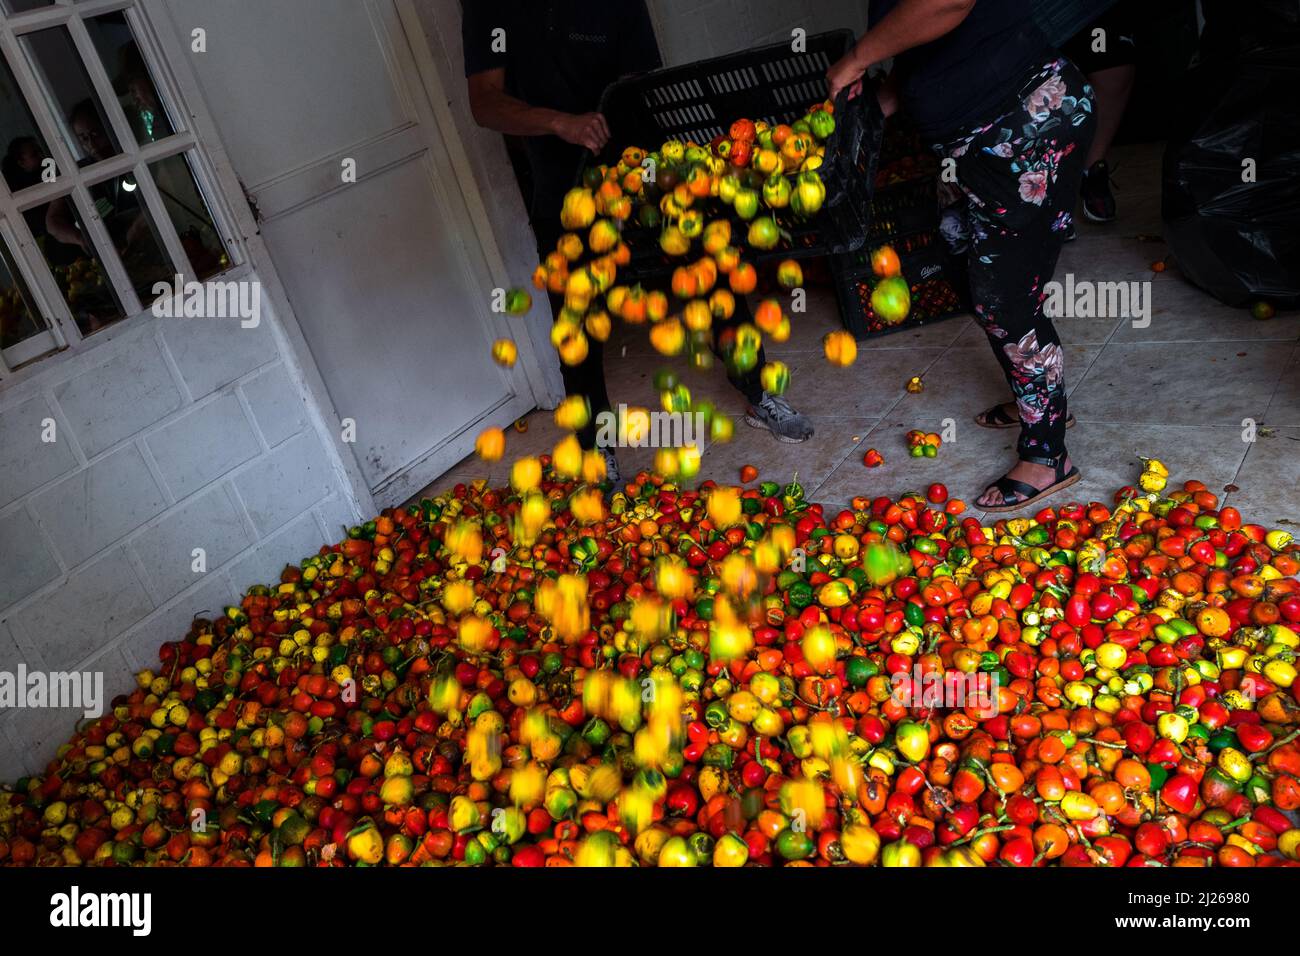 Colombian workers throw chontaduro (peach palm) fruits on the floor in a processing facility in Cali, Valle del Cauca, Colombia. Stock Photo